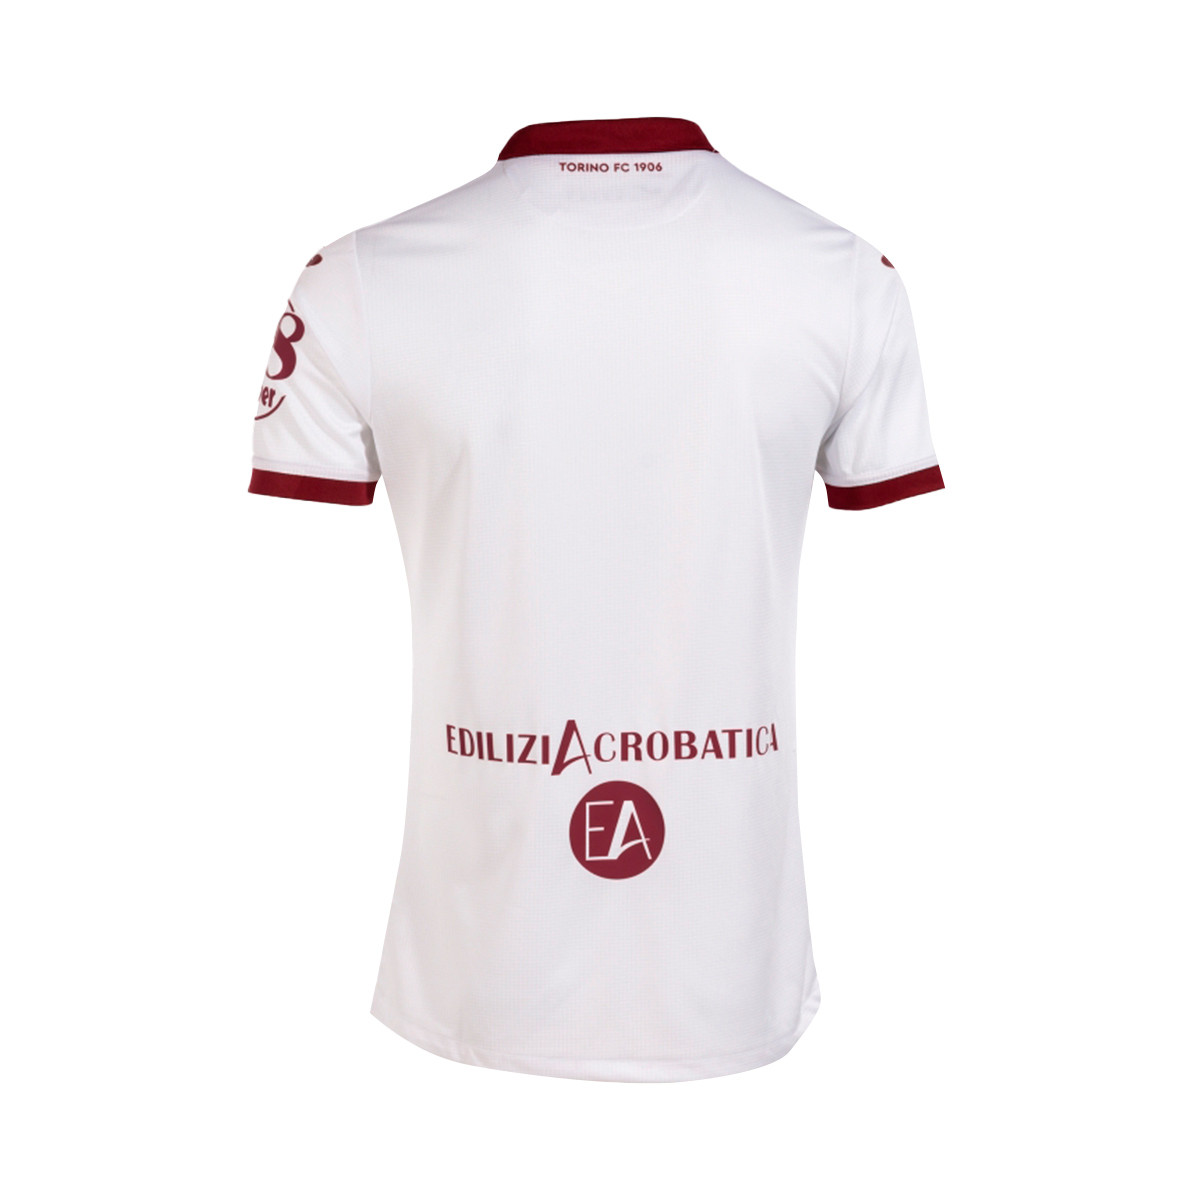 This is the Torino 22/23 jersey made by Joma - Joma World